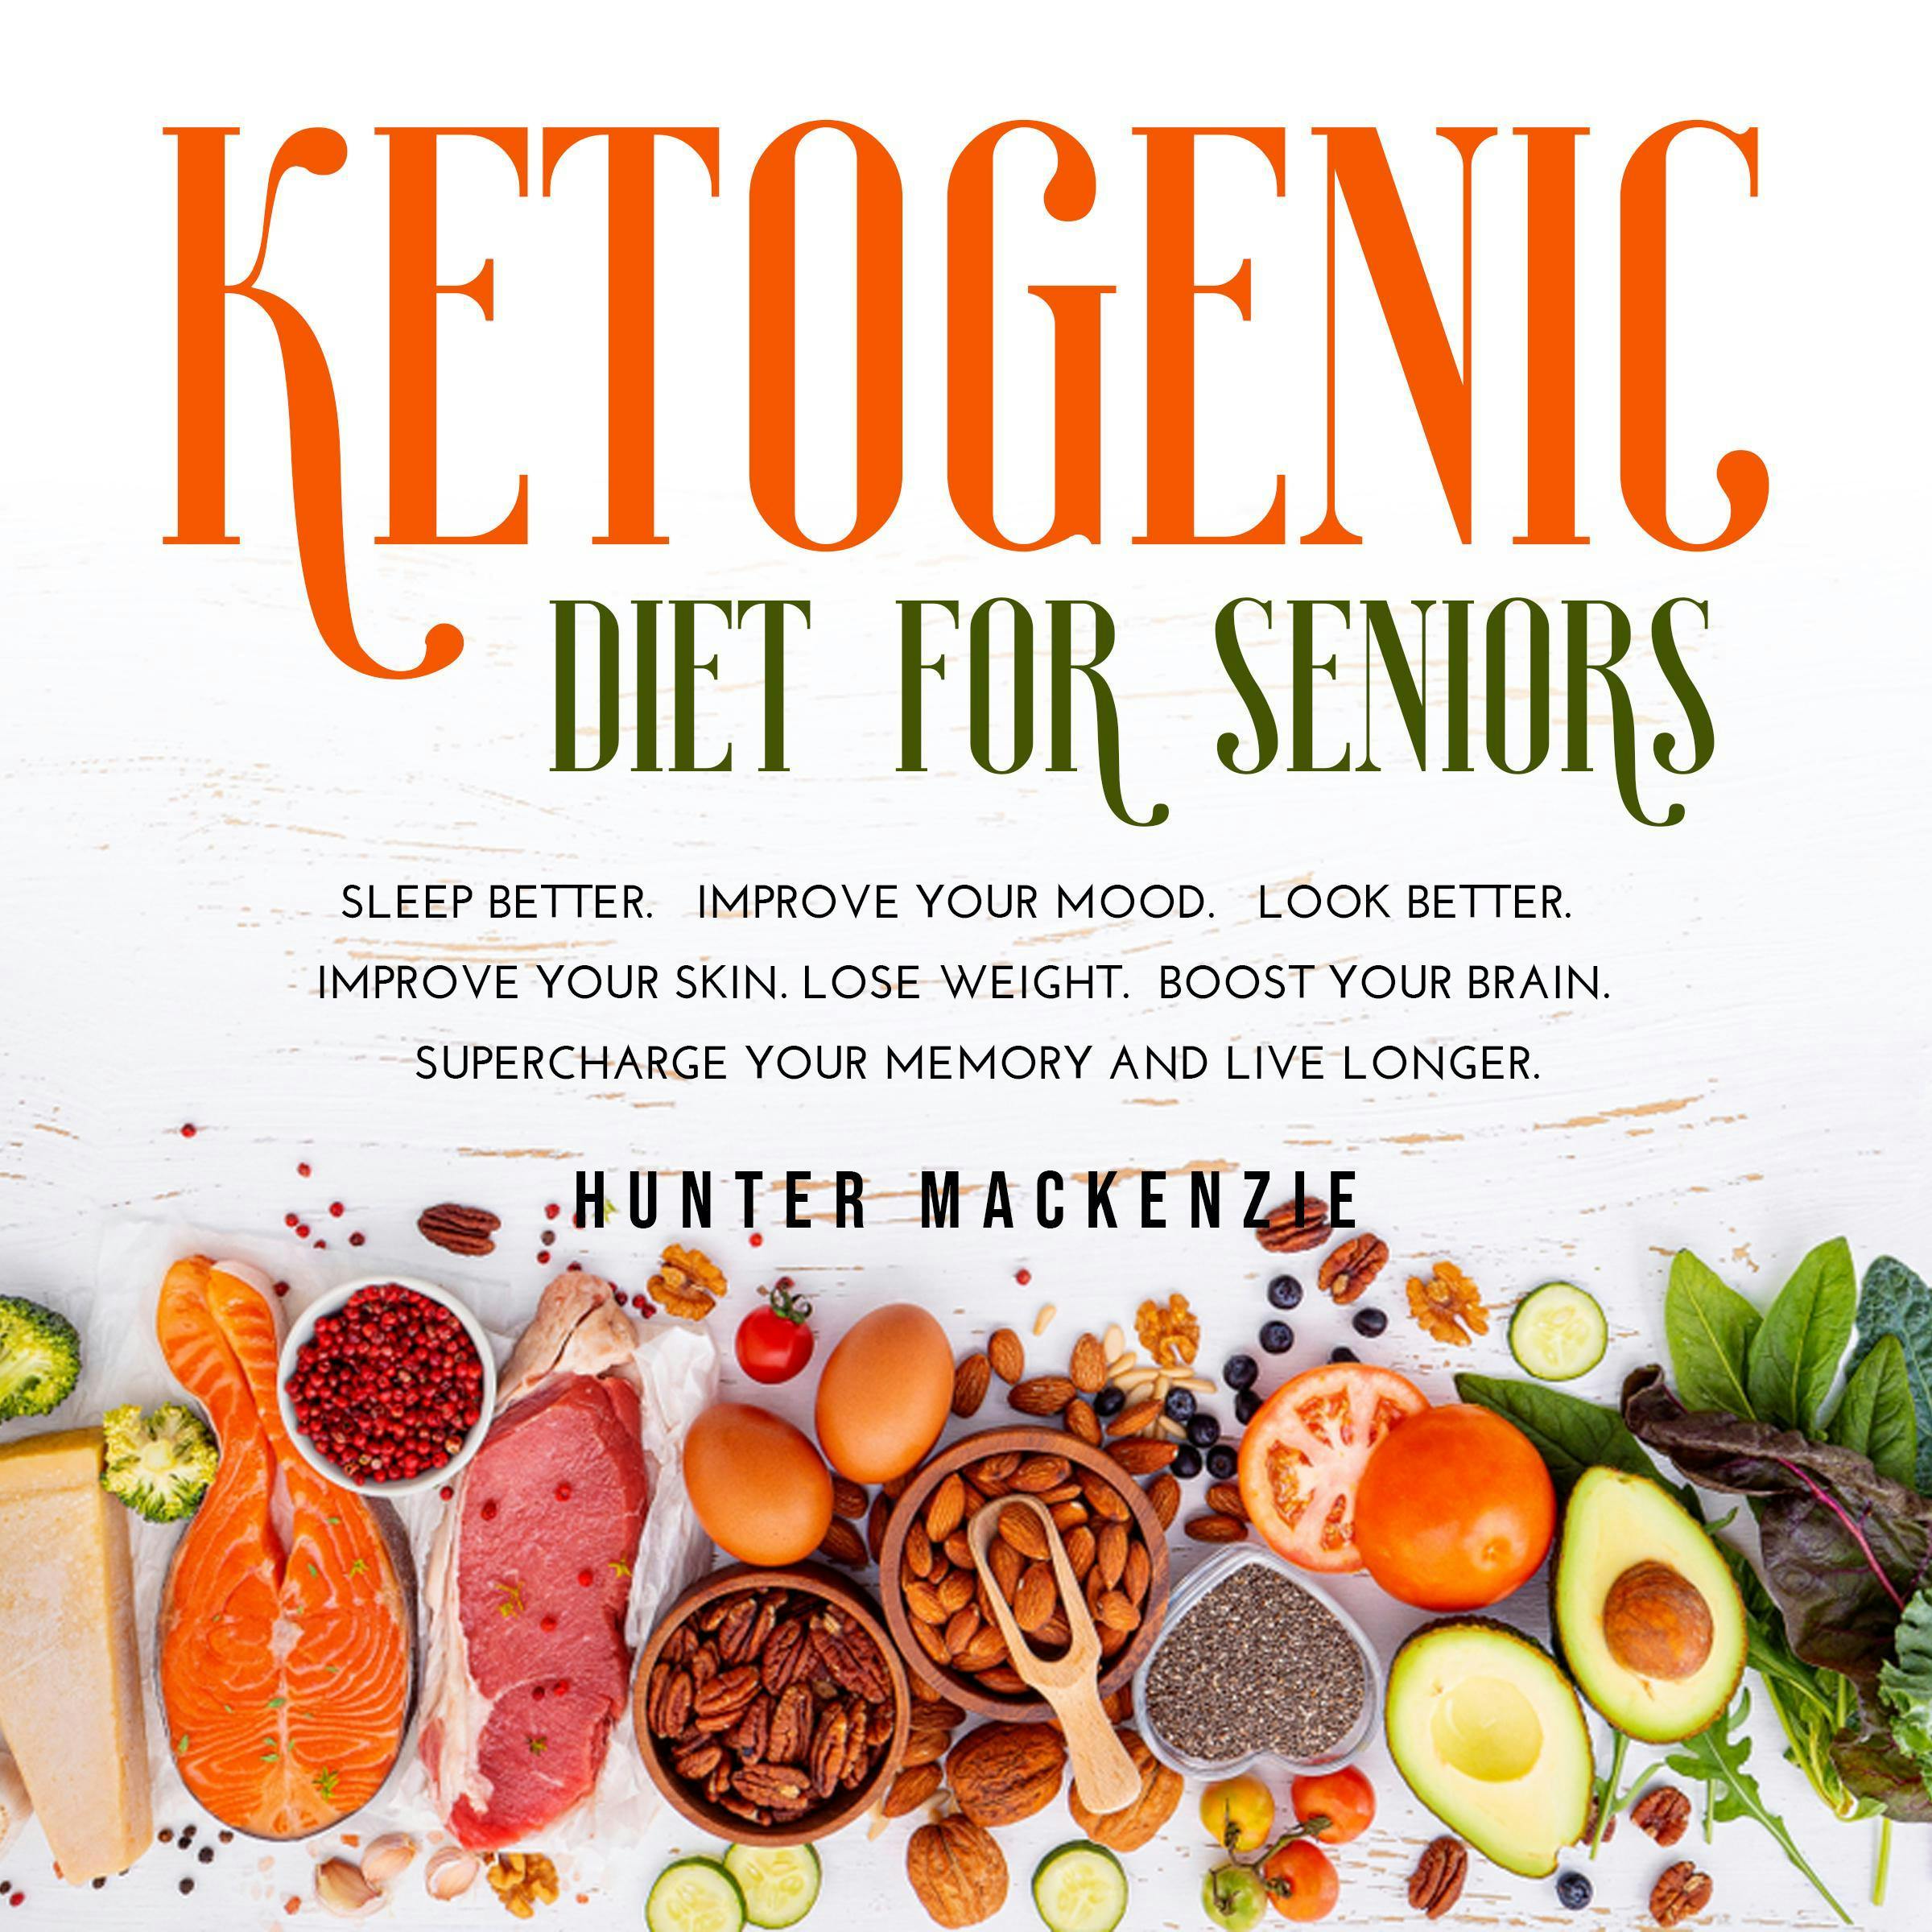 Ketogenic Diet for Seniors: Sleep Better. Improve Your Mood. Look Better. Improve Your Skin. Lose Weight. Boost your Brain. Supercharge Your Memory and Live Longer - Hunter Mackenzie